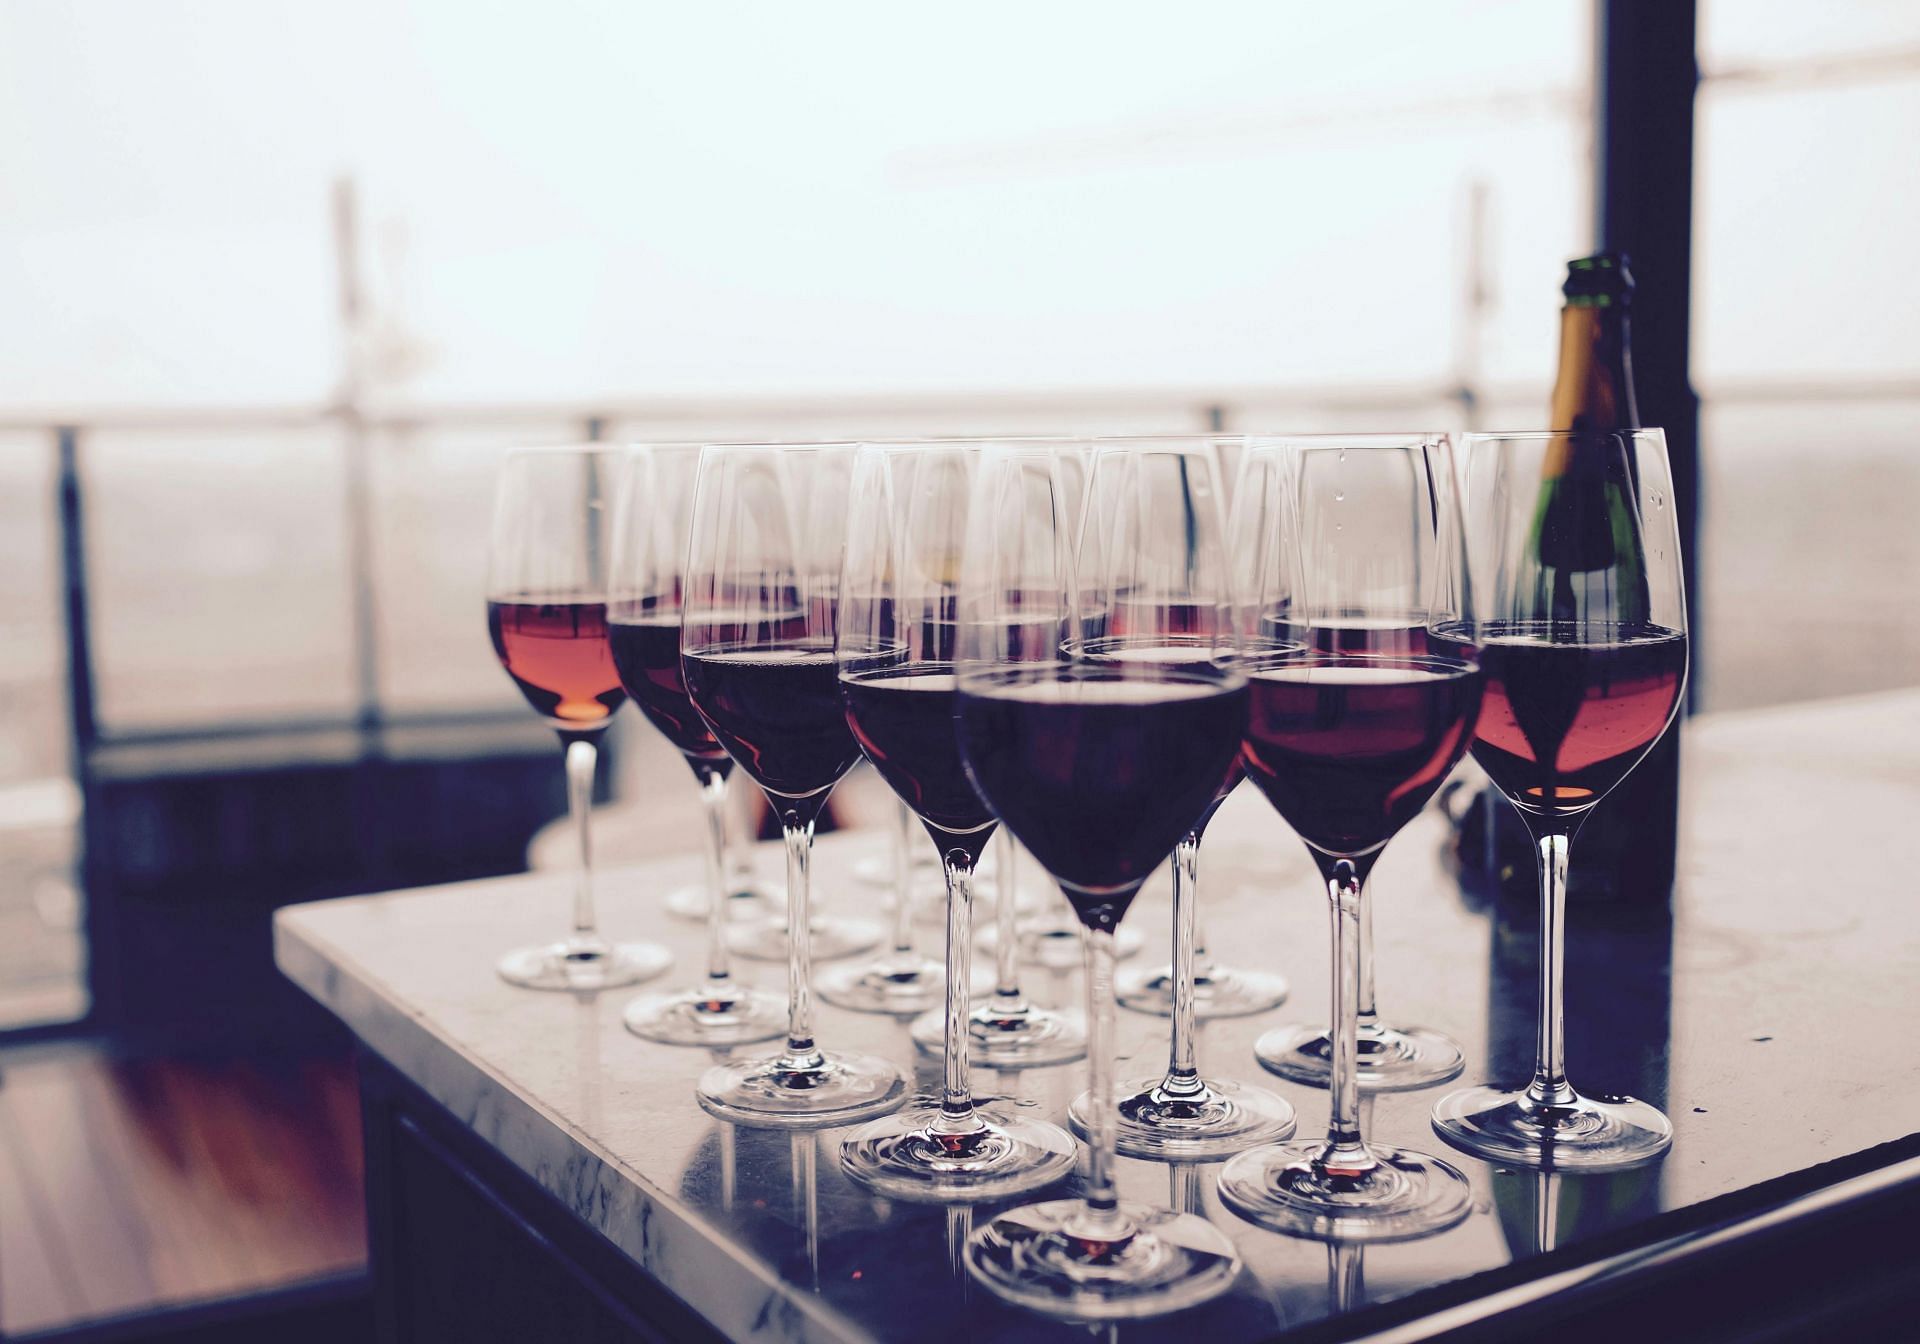 Red wine side effects (image sourced via Pexels / Photo by timur)